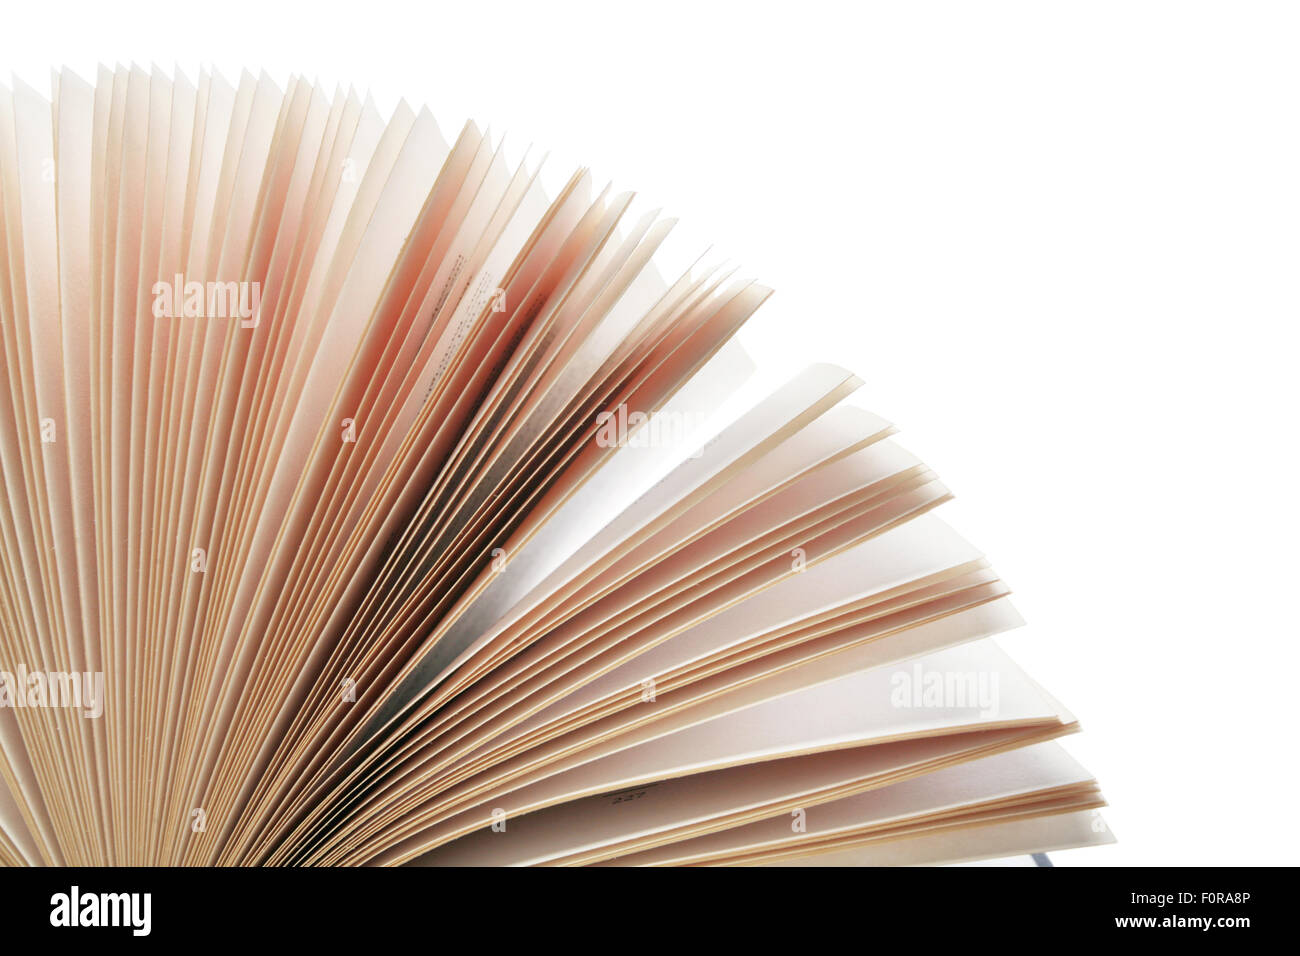 Shot of edges of pages fanned out, backlit with copy space Stock Photo